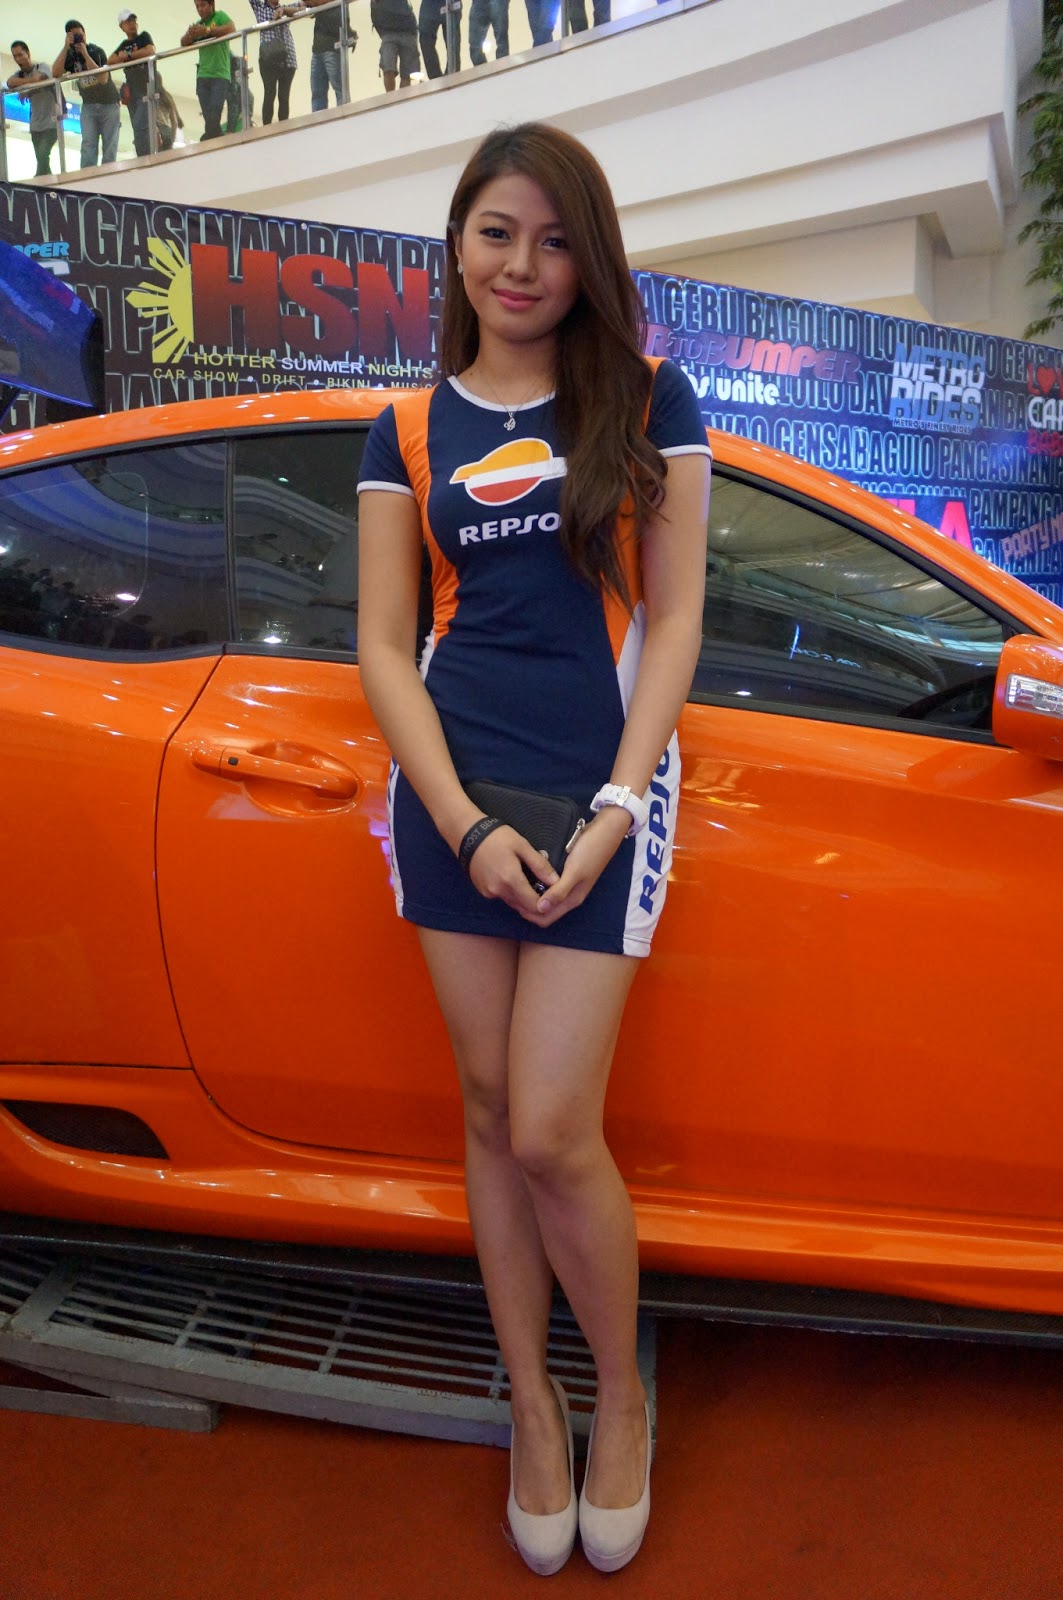 Babes Are More Fun In The Philippines At The Hot Import Nights 2 Manila ~ Wazzup Pilipinas News